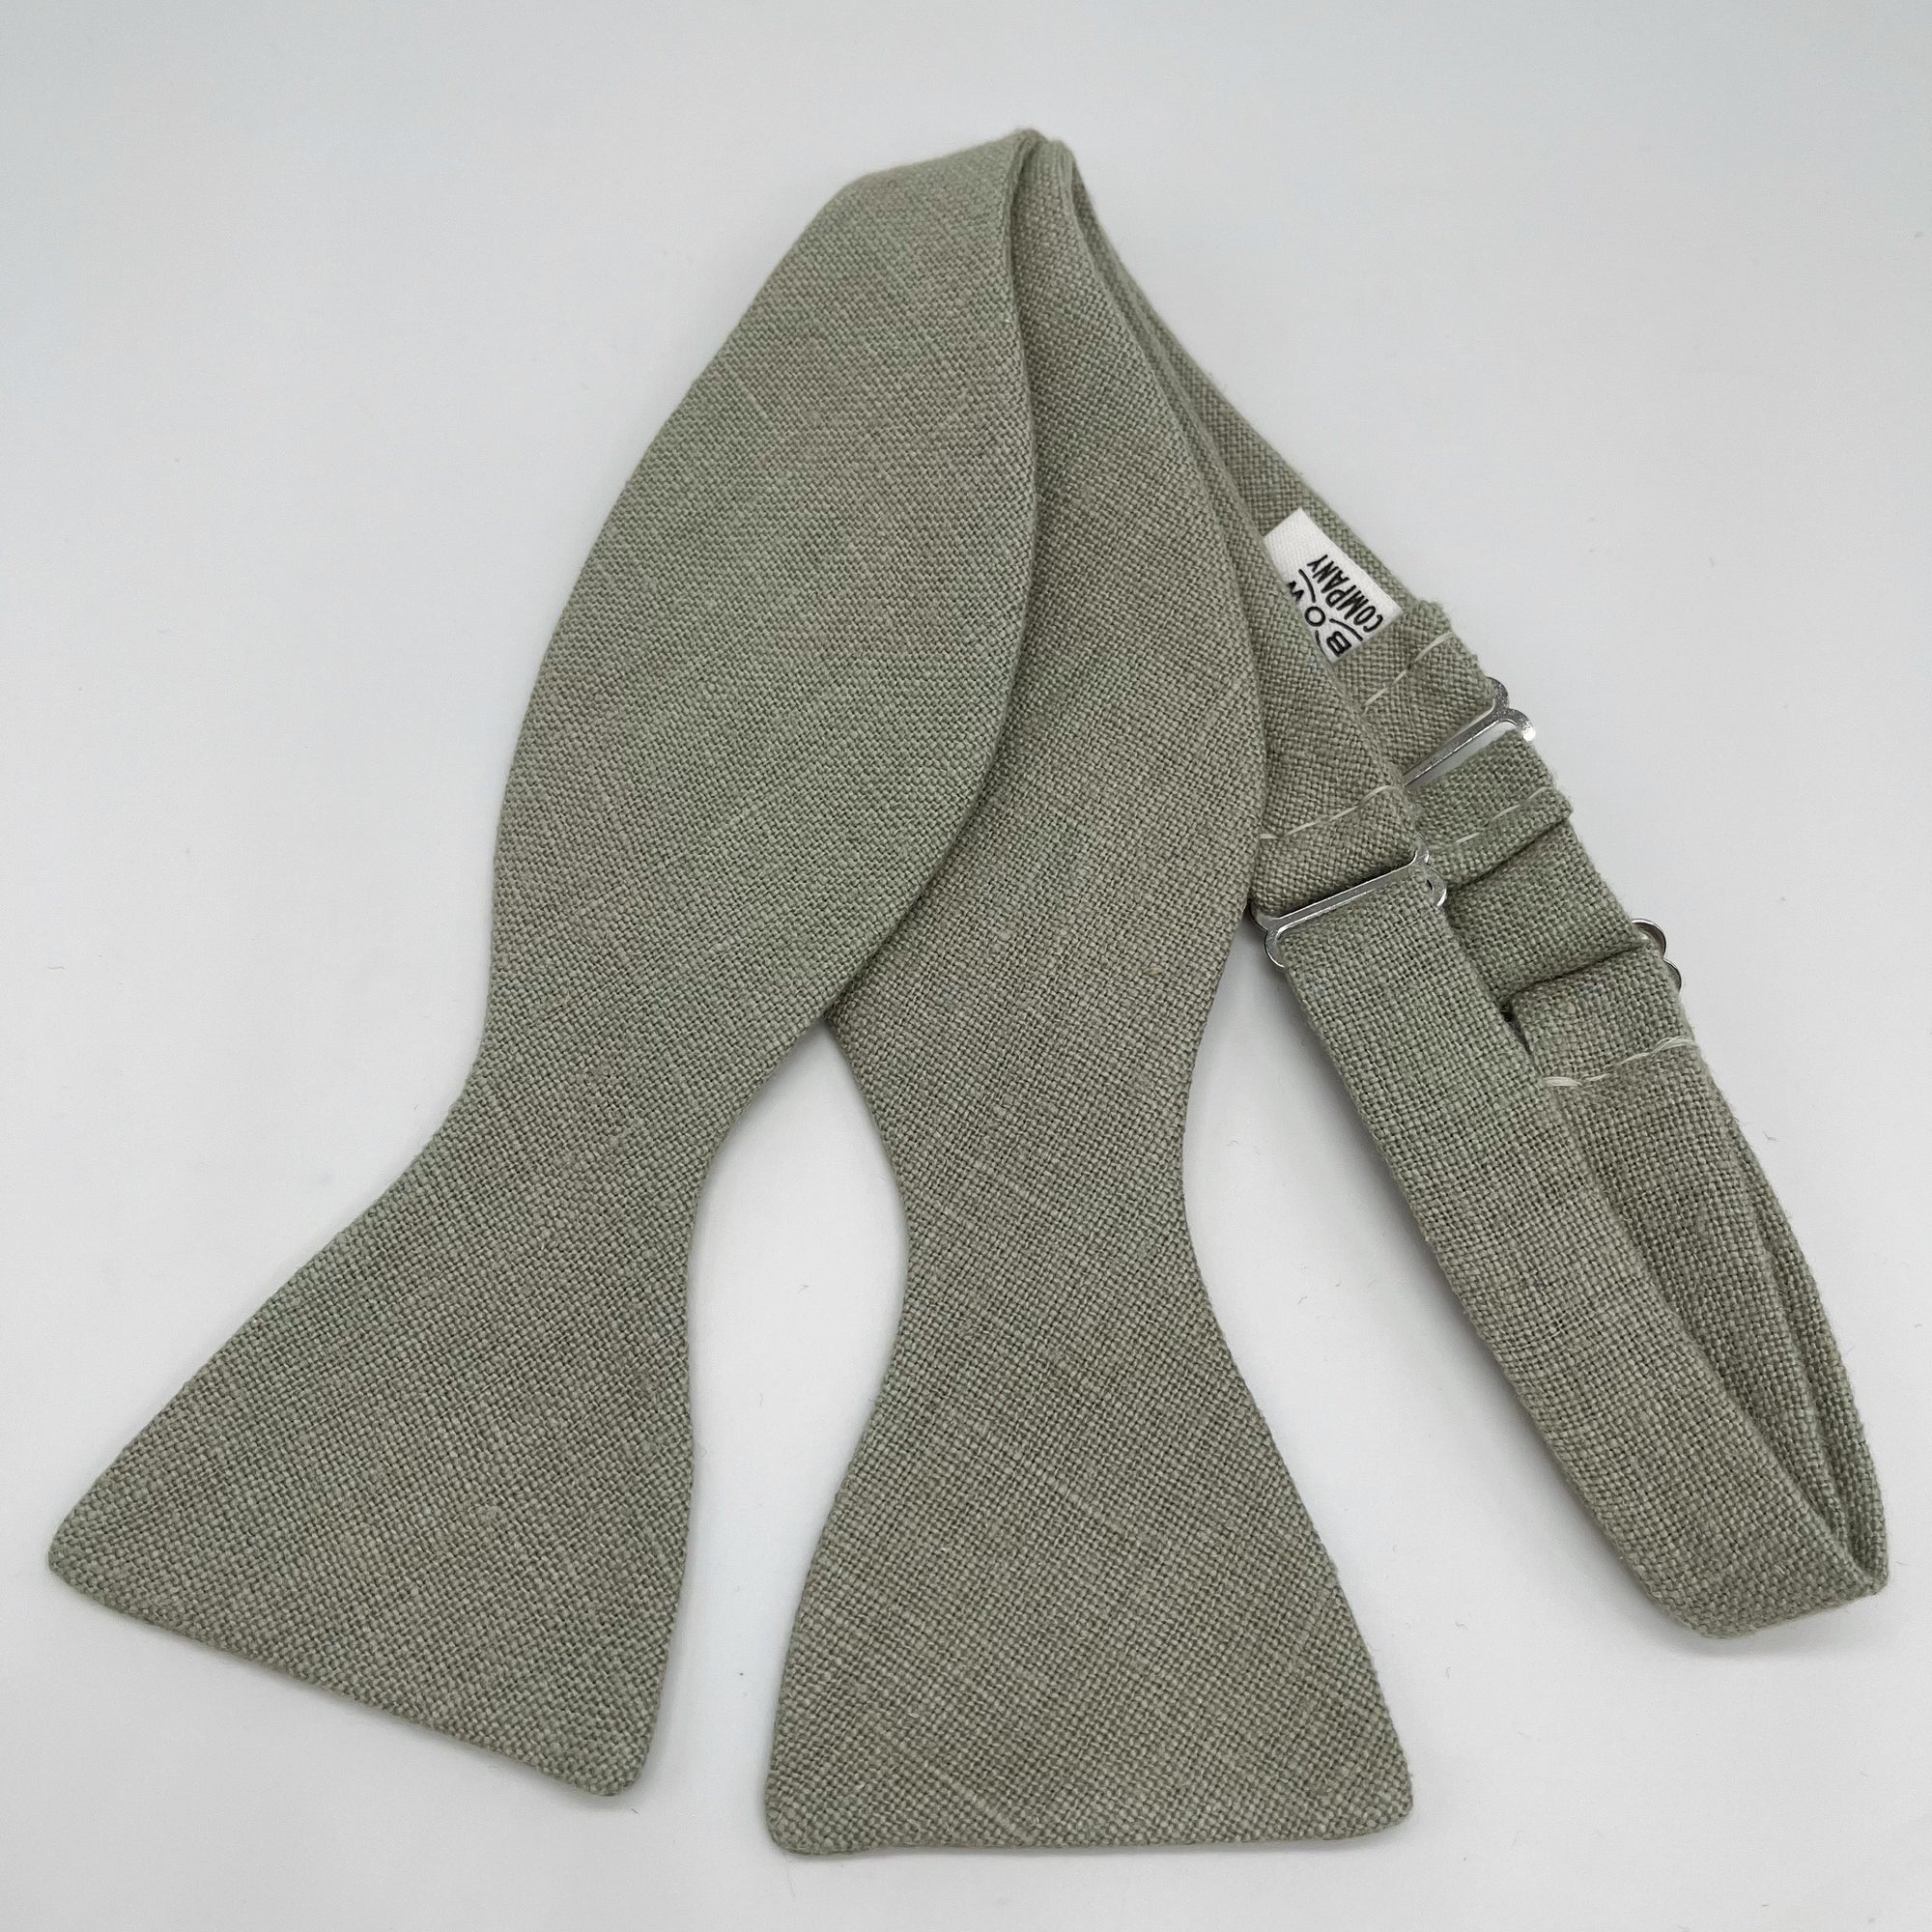 Self-Tie Bow Tie in Sage Green Irish Linen by the Belfast Bow Company